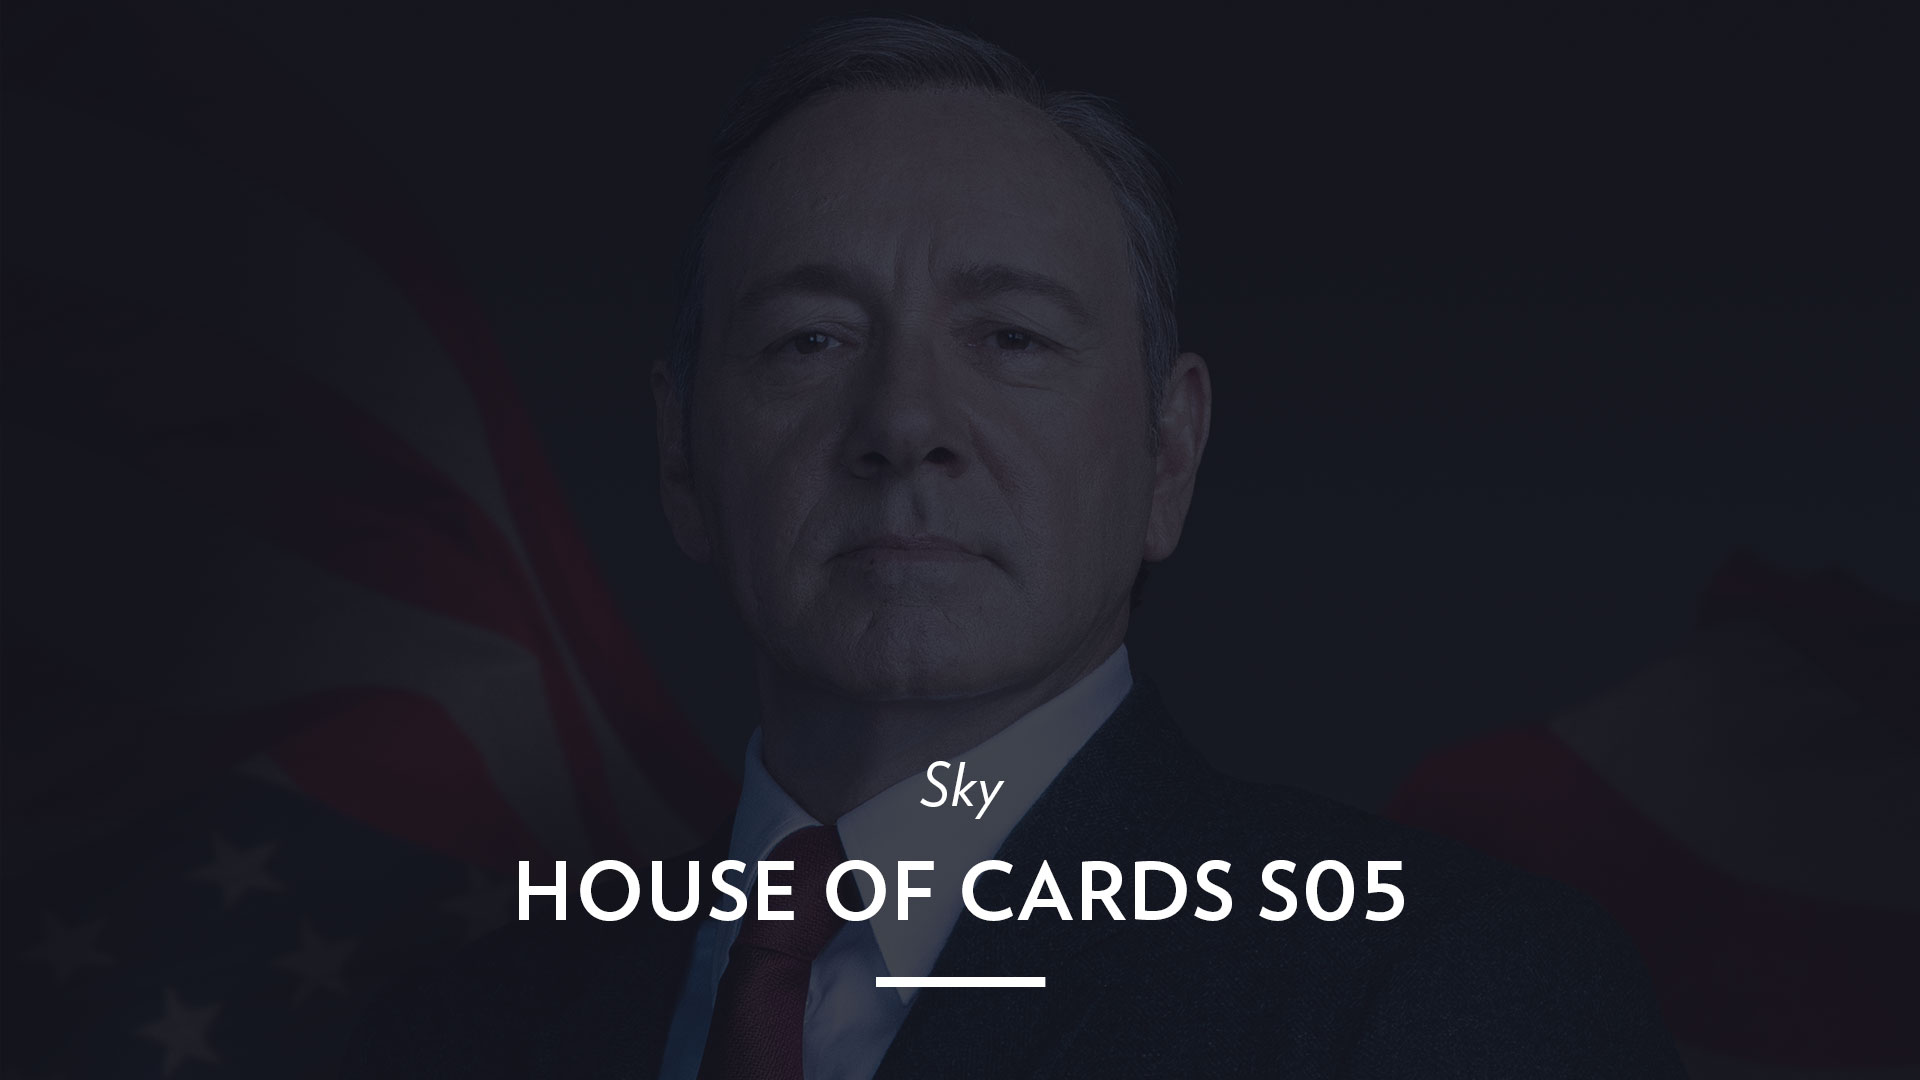 Sky – House of Cards